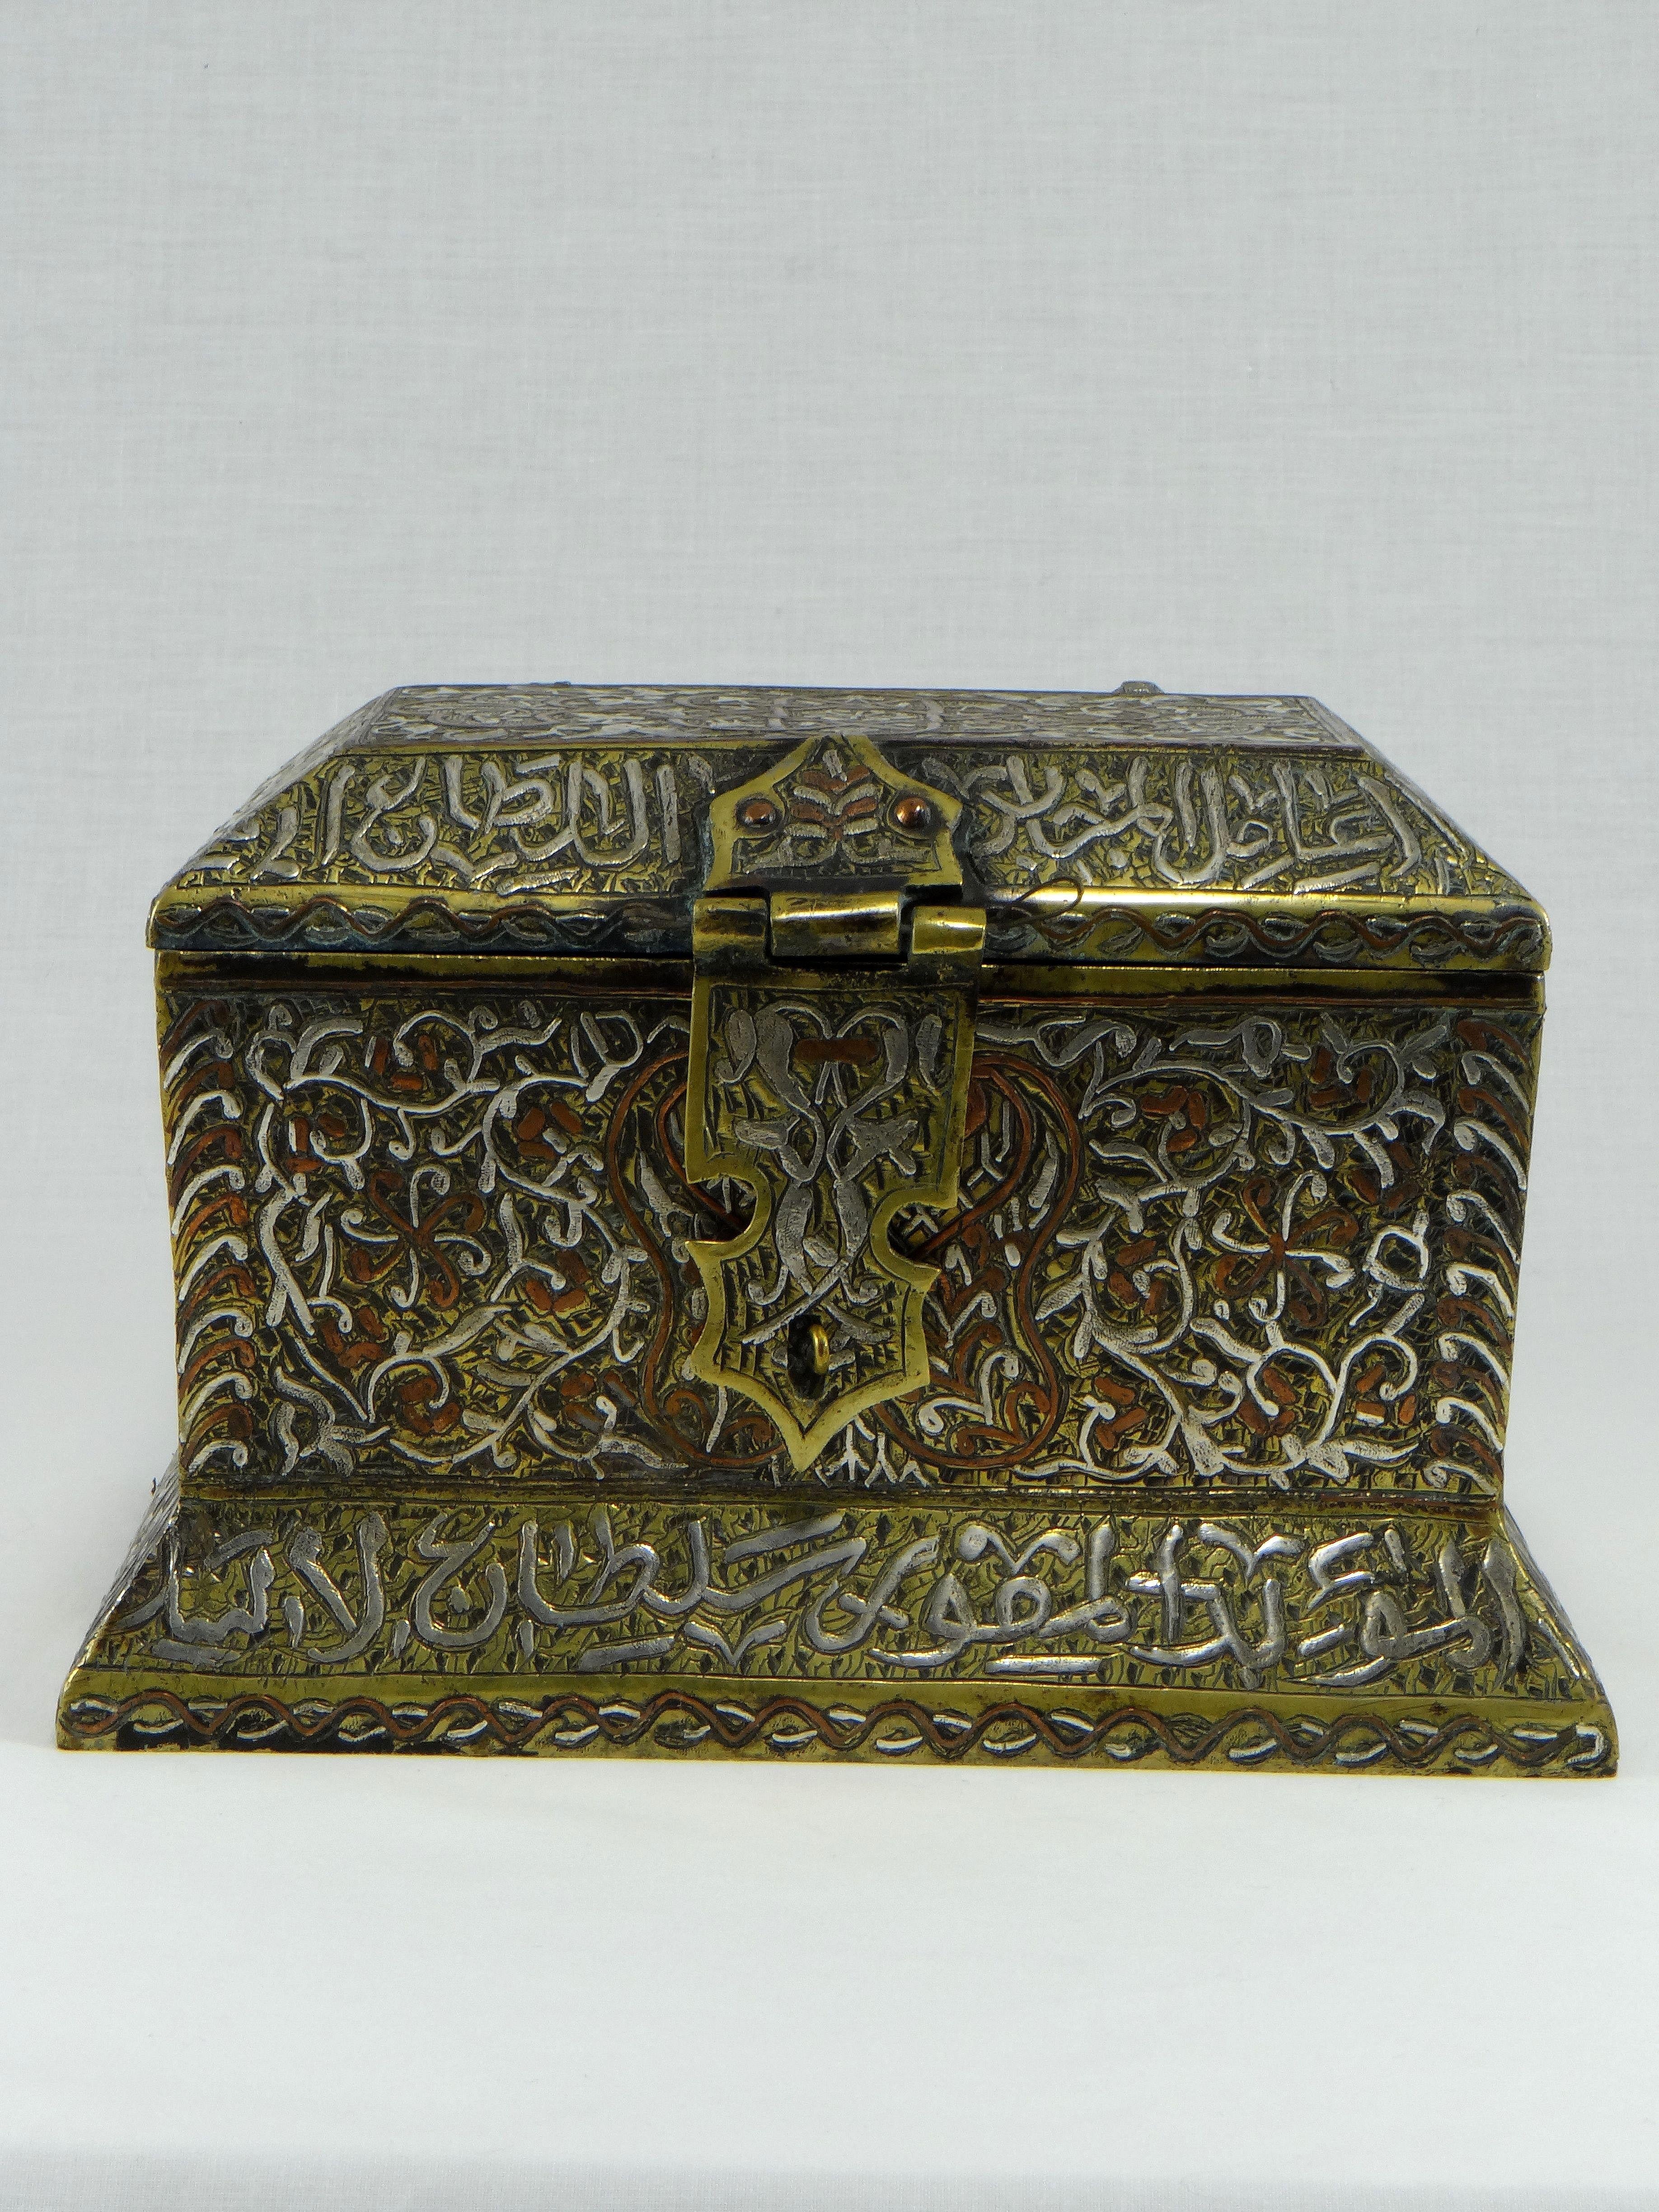 Beautiful and important Syrian cabinet of the early 20th century bronze whose rich decoration inlaid copper and silver floral garlands and votive phrases. 
The work, of great finesse, gives this piece a precious character and aesthetics of great